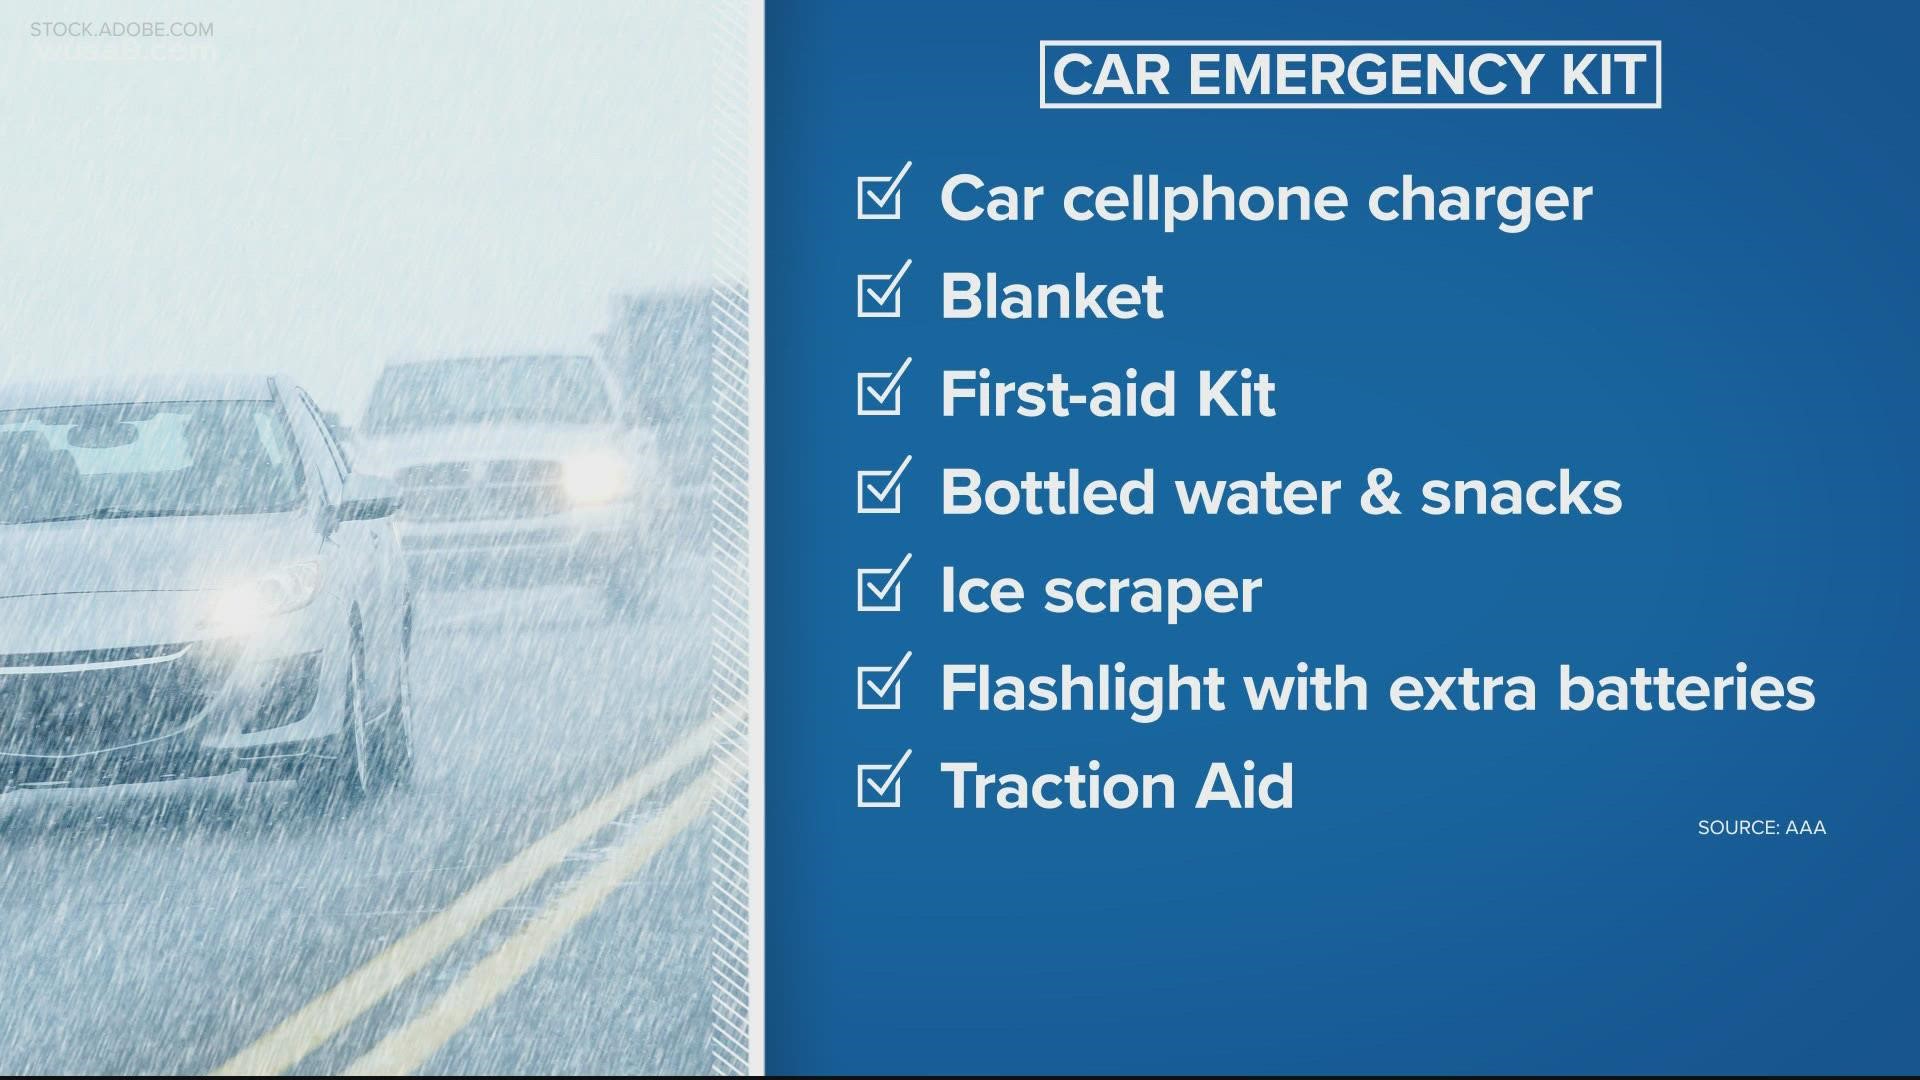 Winter Road Safety: Build an emergency car kit